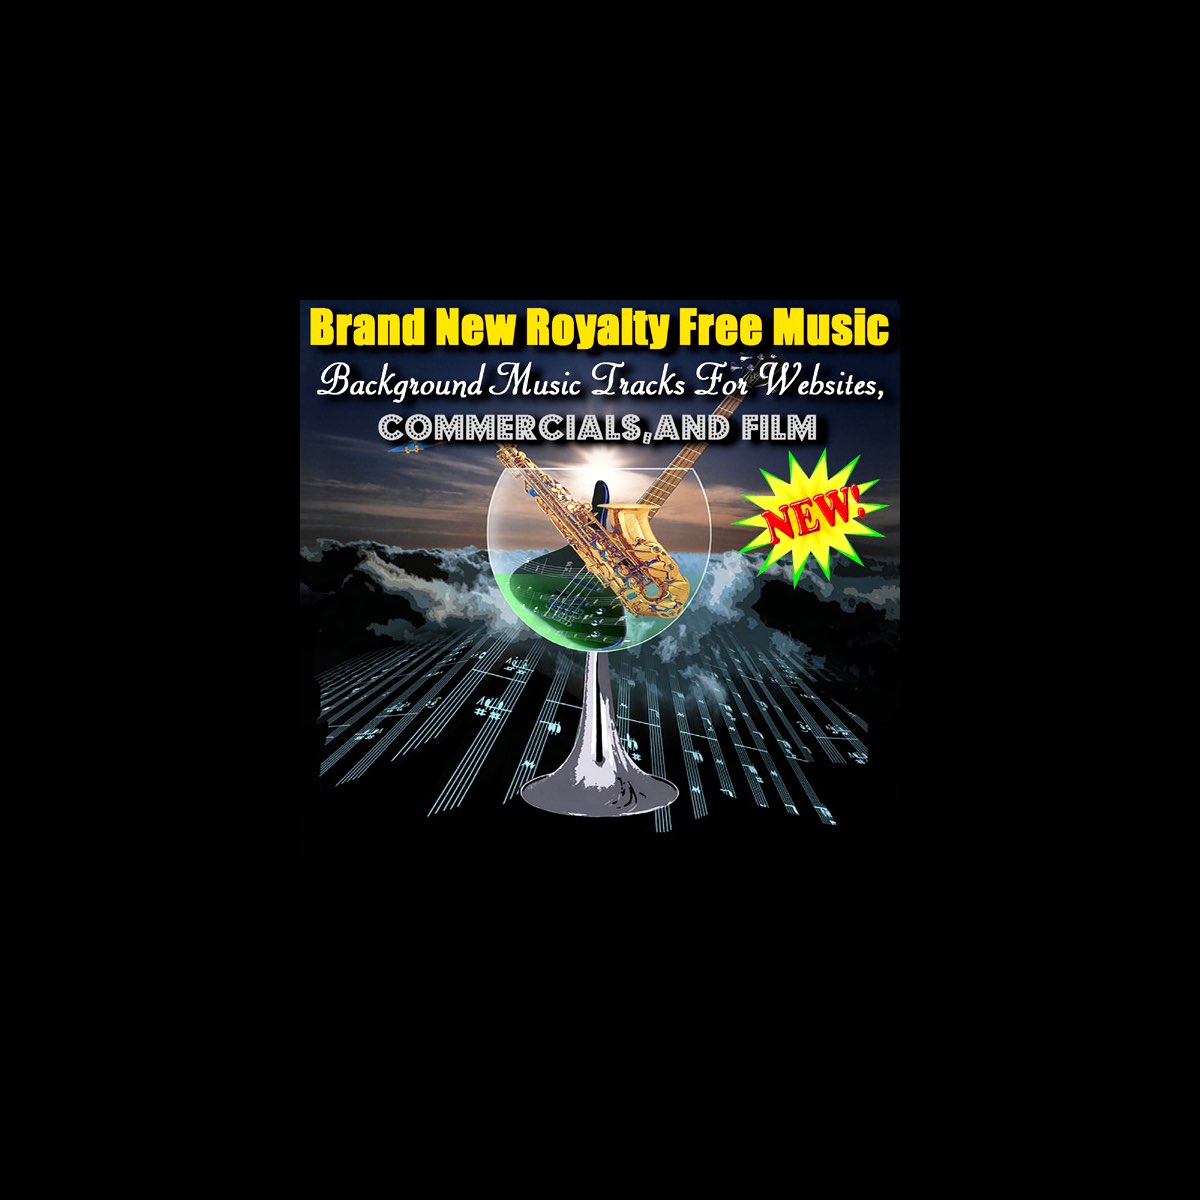 Background Music Tracks for Websites, Commercials, and Film by Brand New  Royalty Free Music on Apple Music